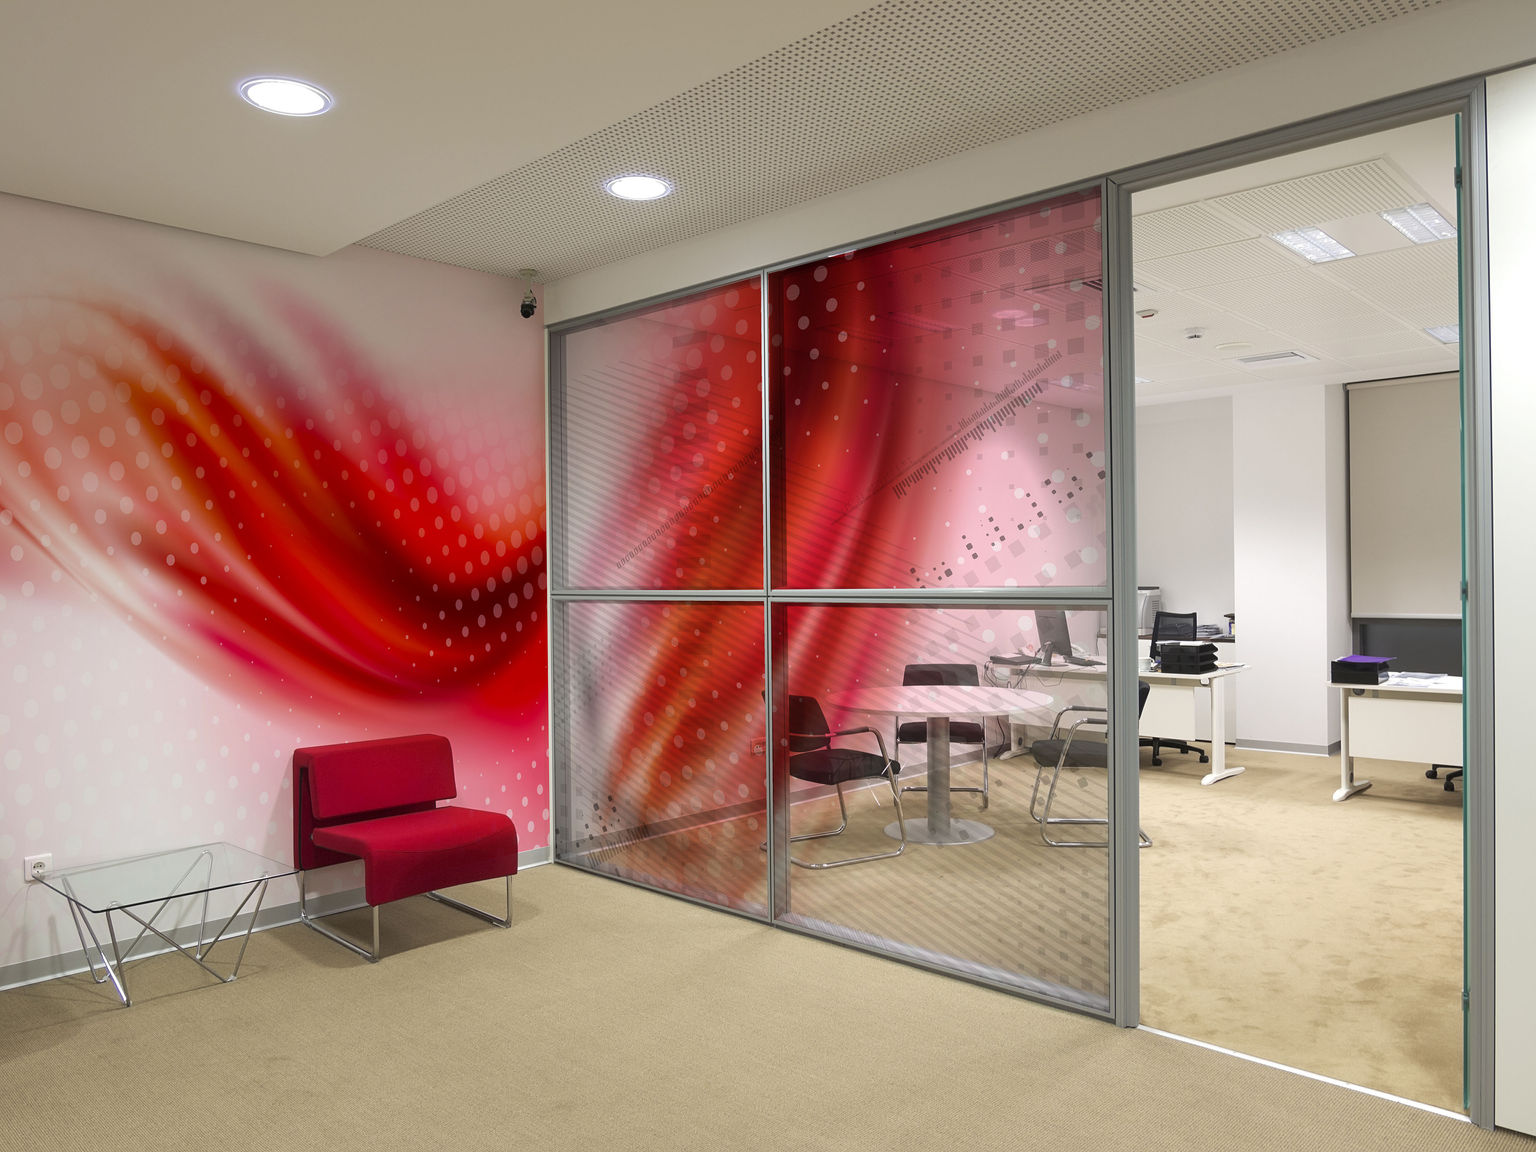 Integrated window film and wall covering graphics transition from wall to glass and feature geometric circle patterns and bold red swashes.